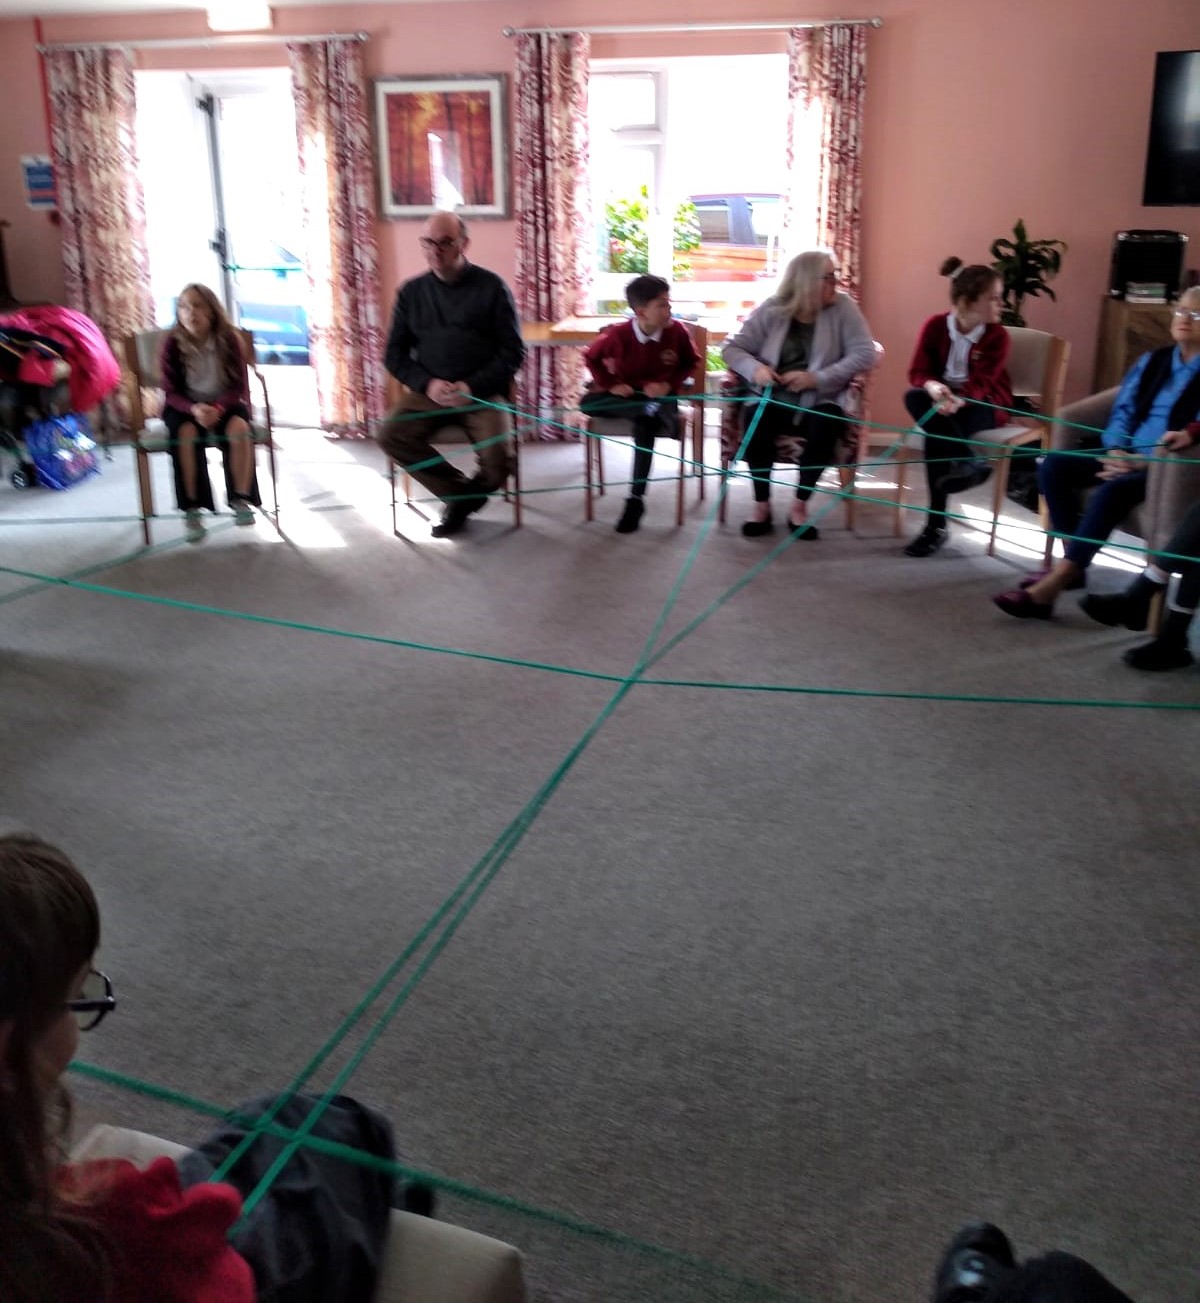 A circle of adults and children with lengths of yarn stretched across the room, connecting them all